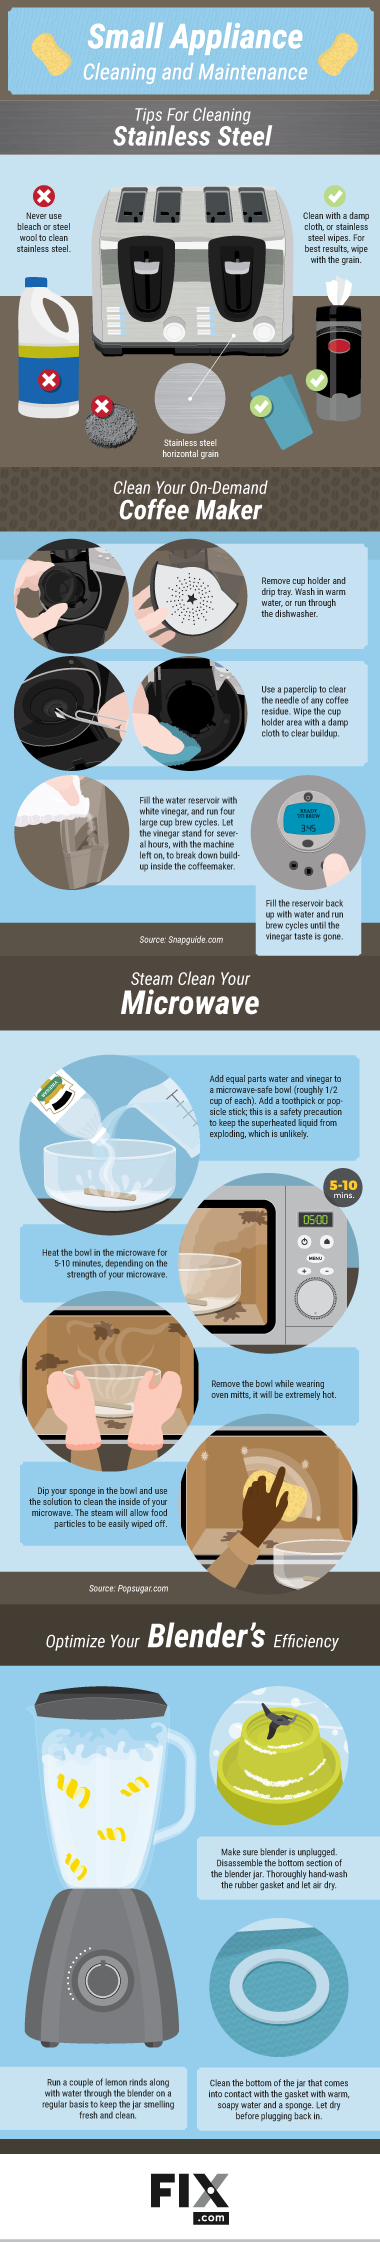 How to Clean Kitchen Appliances the Right Way